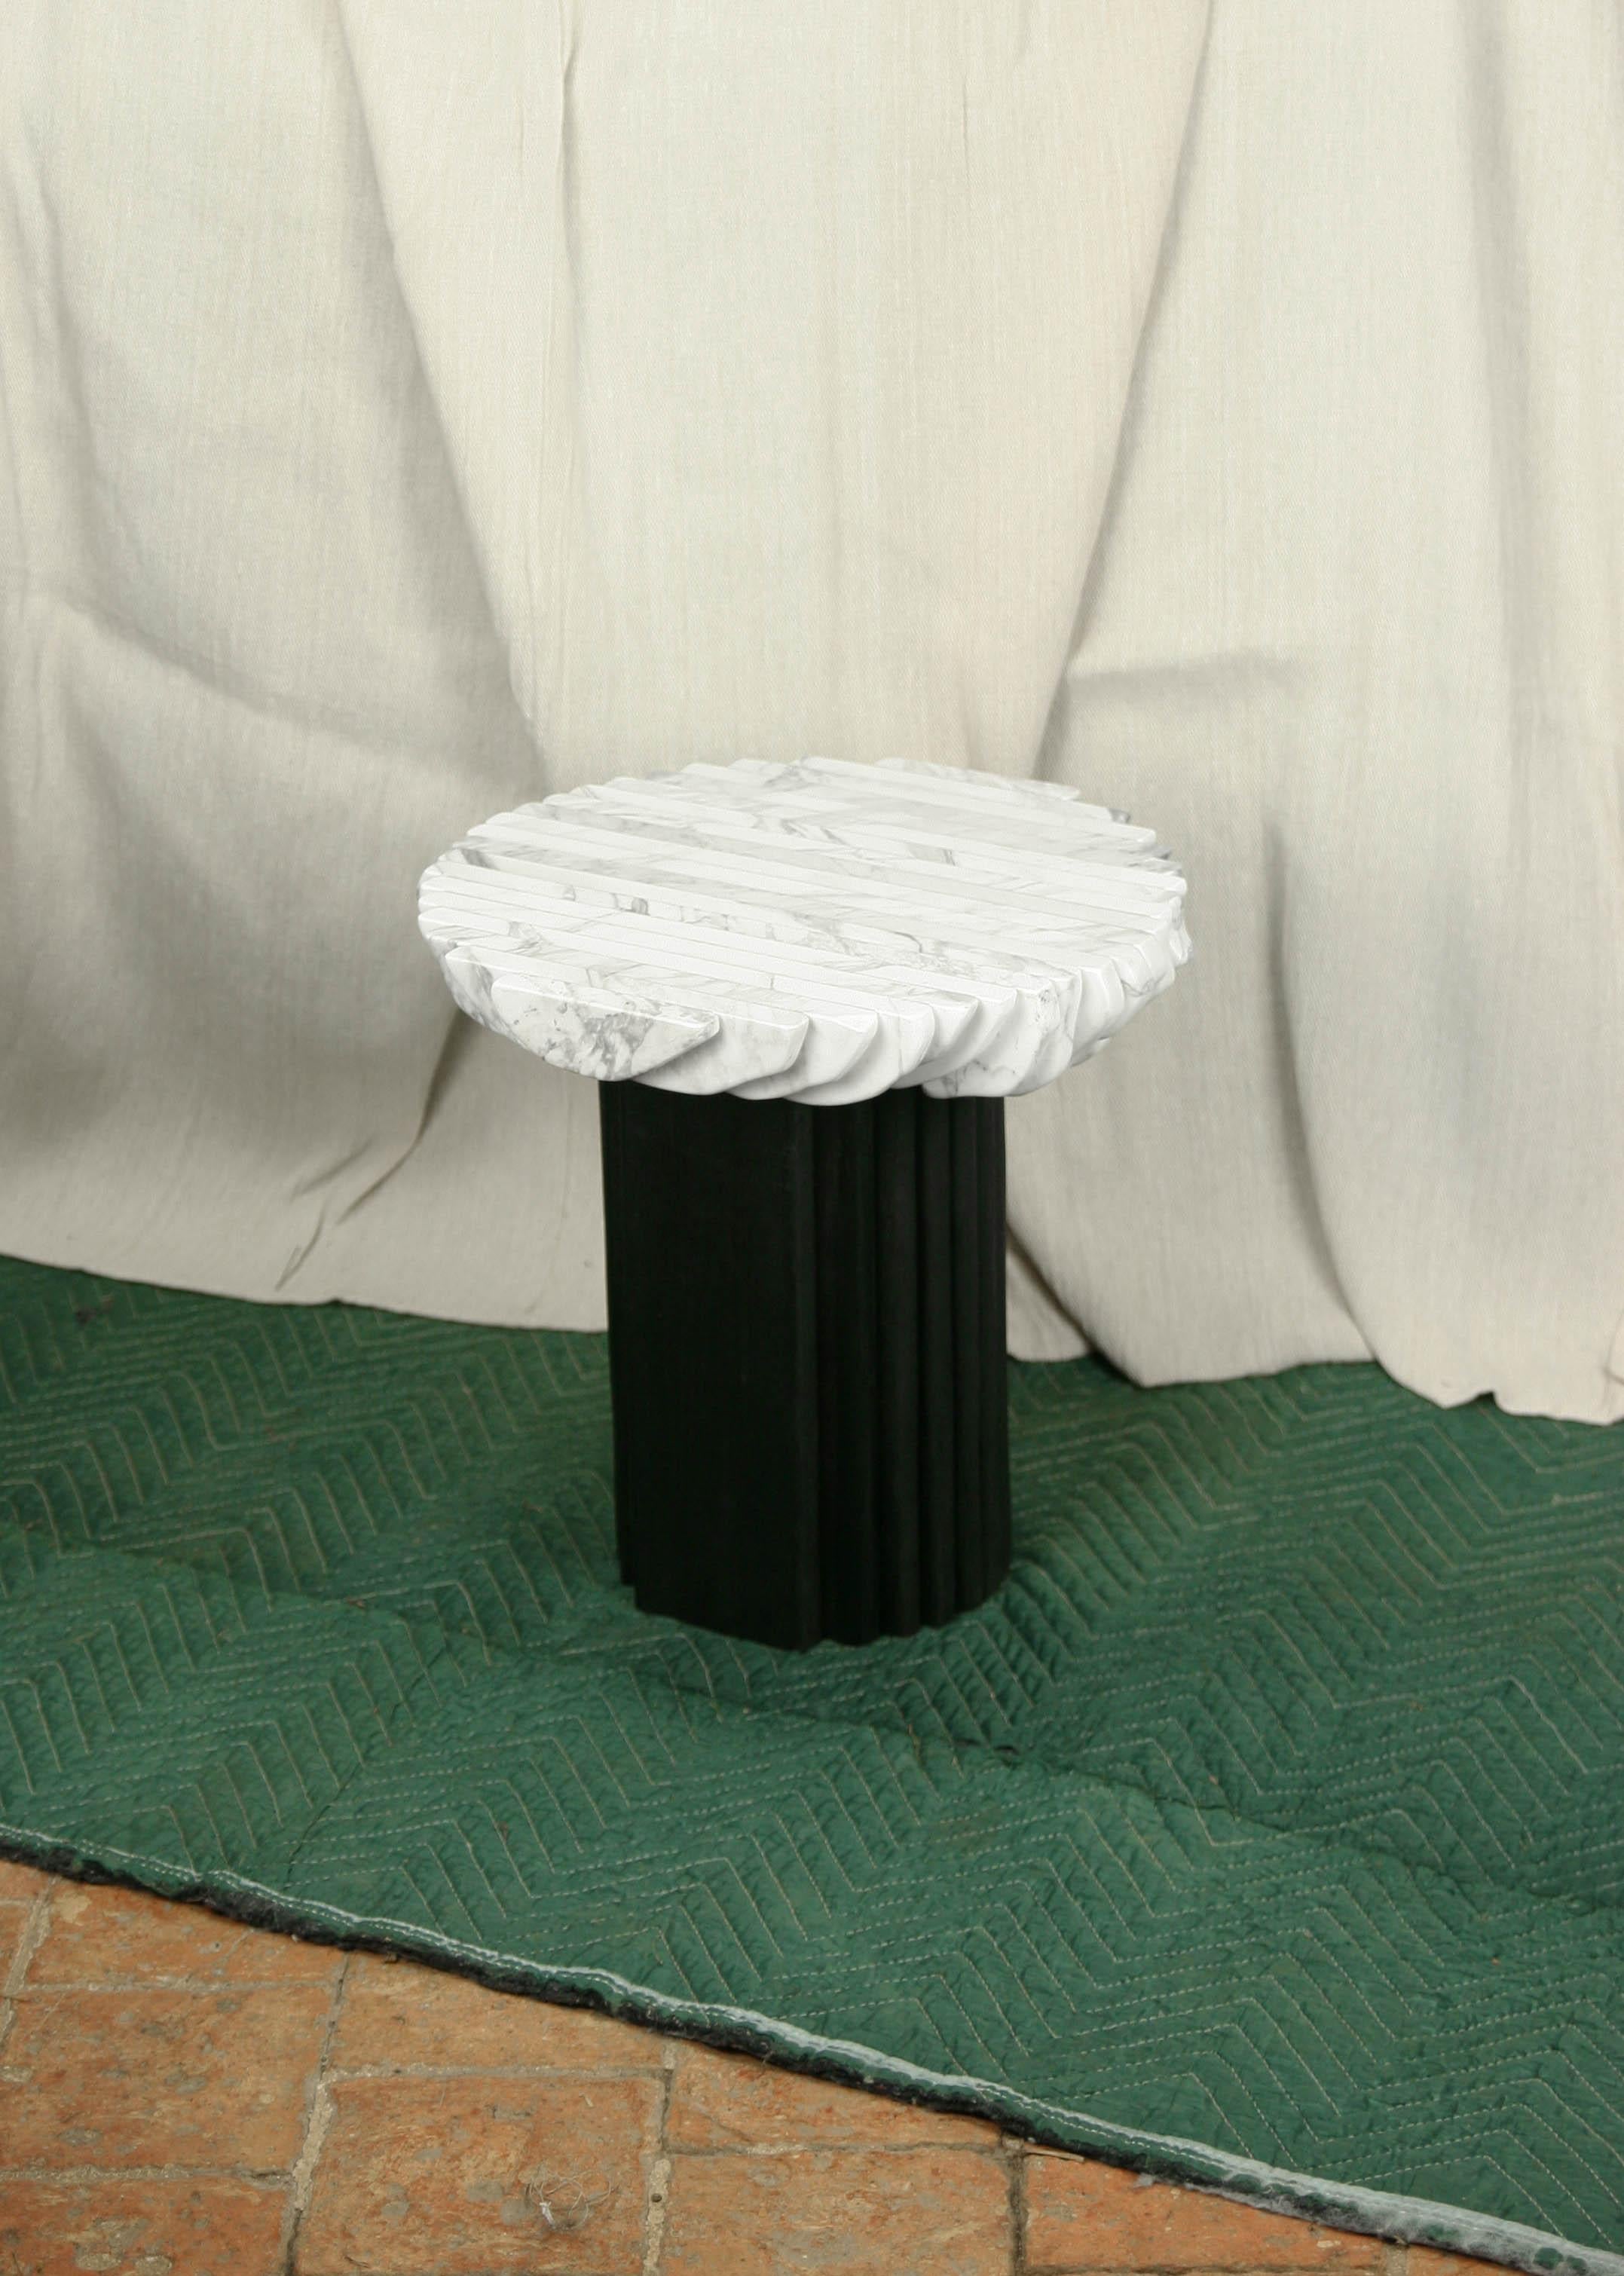 Edge side table by Krzywda.
Dimensions: 35 L x 35 D x 55 H cm.
Materials: marble, oak.
Available in other materials.

Individually handmade in France by Krzywda. All materials employed are from France. The individually selected marble blocks